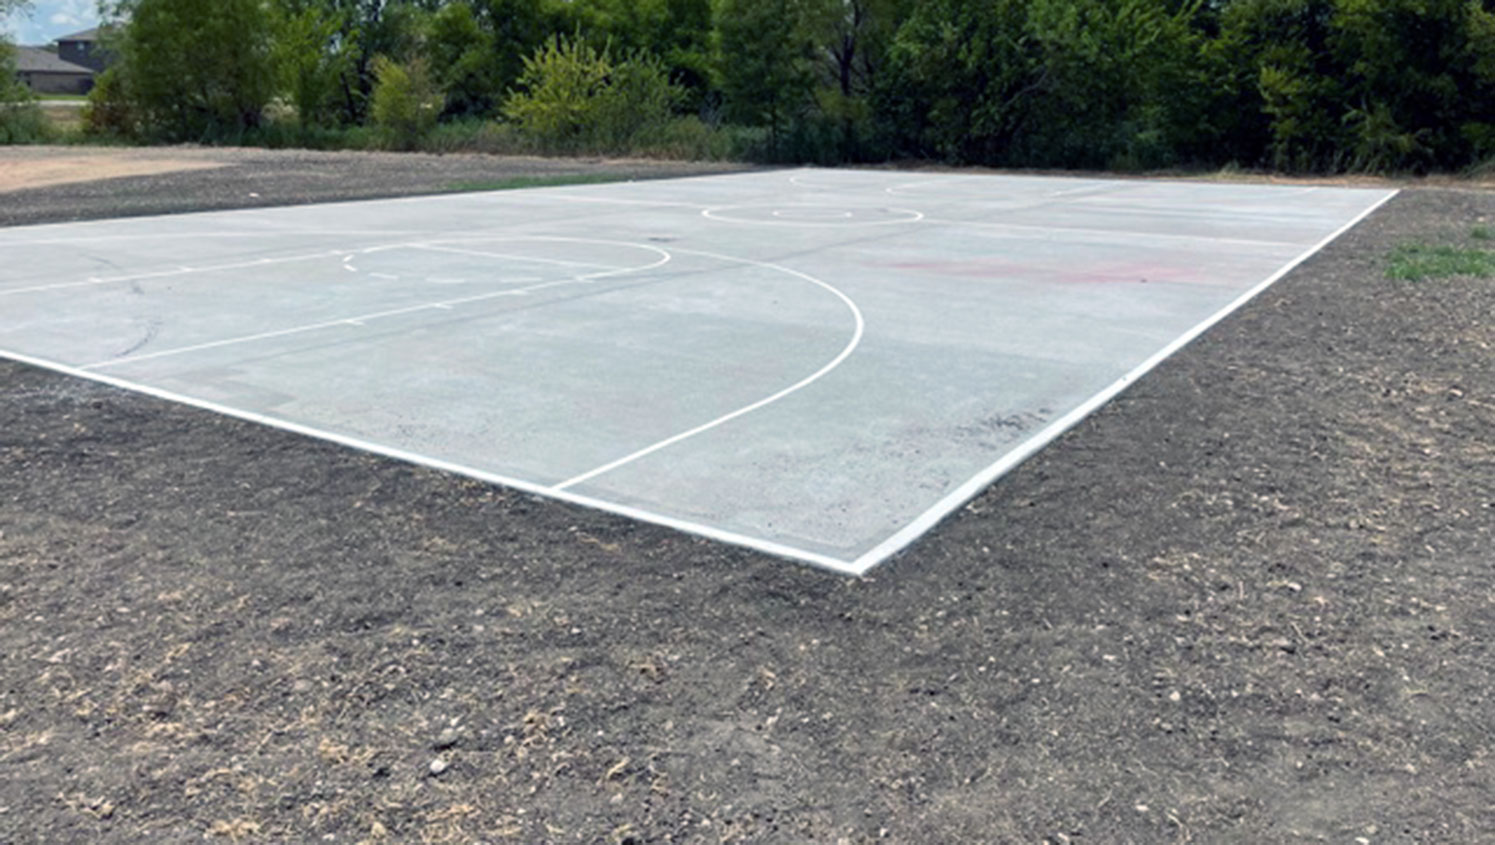 basketball court before re-striping